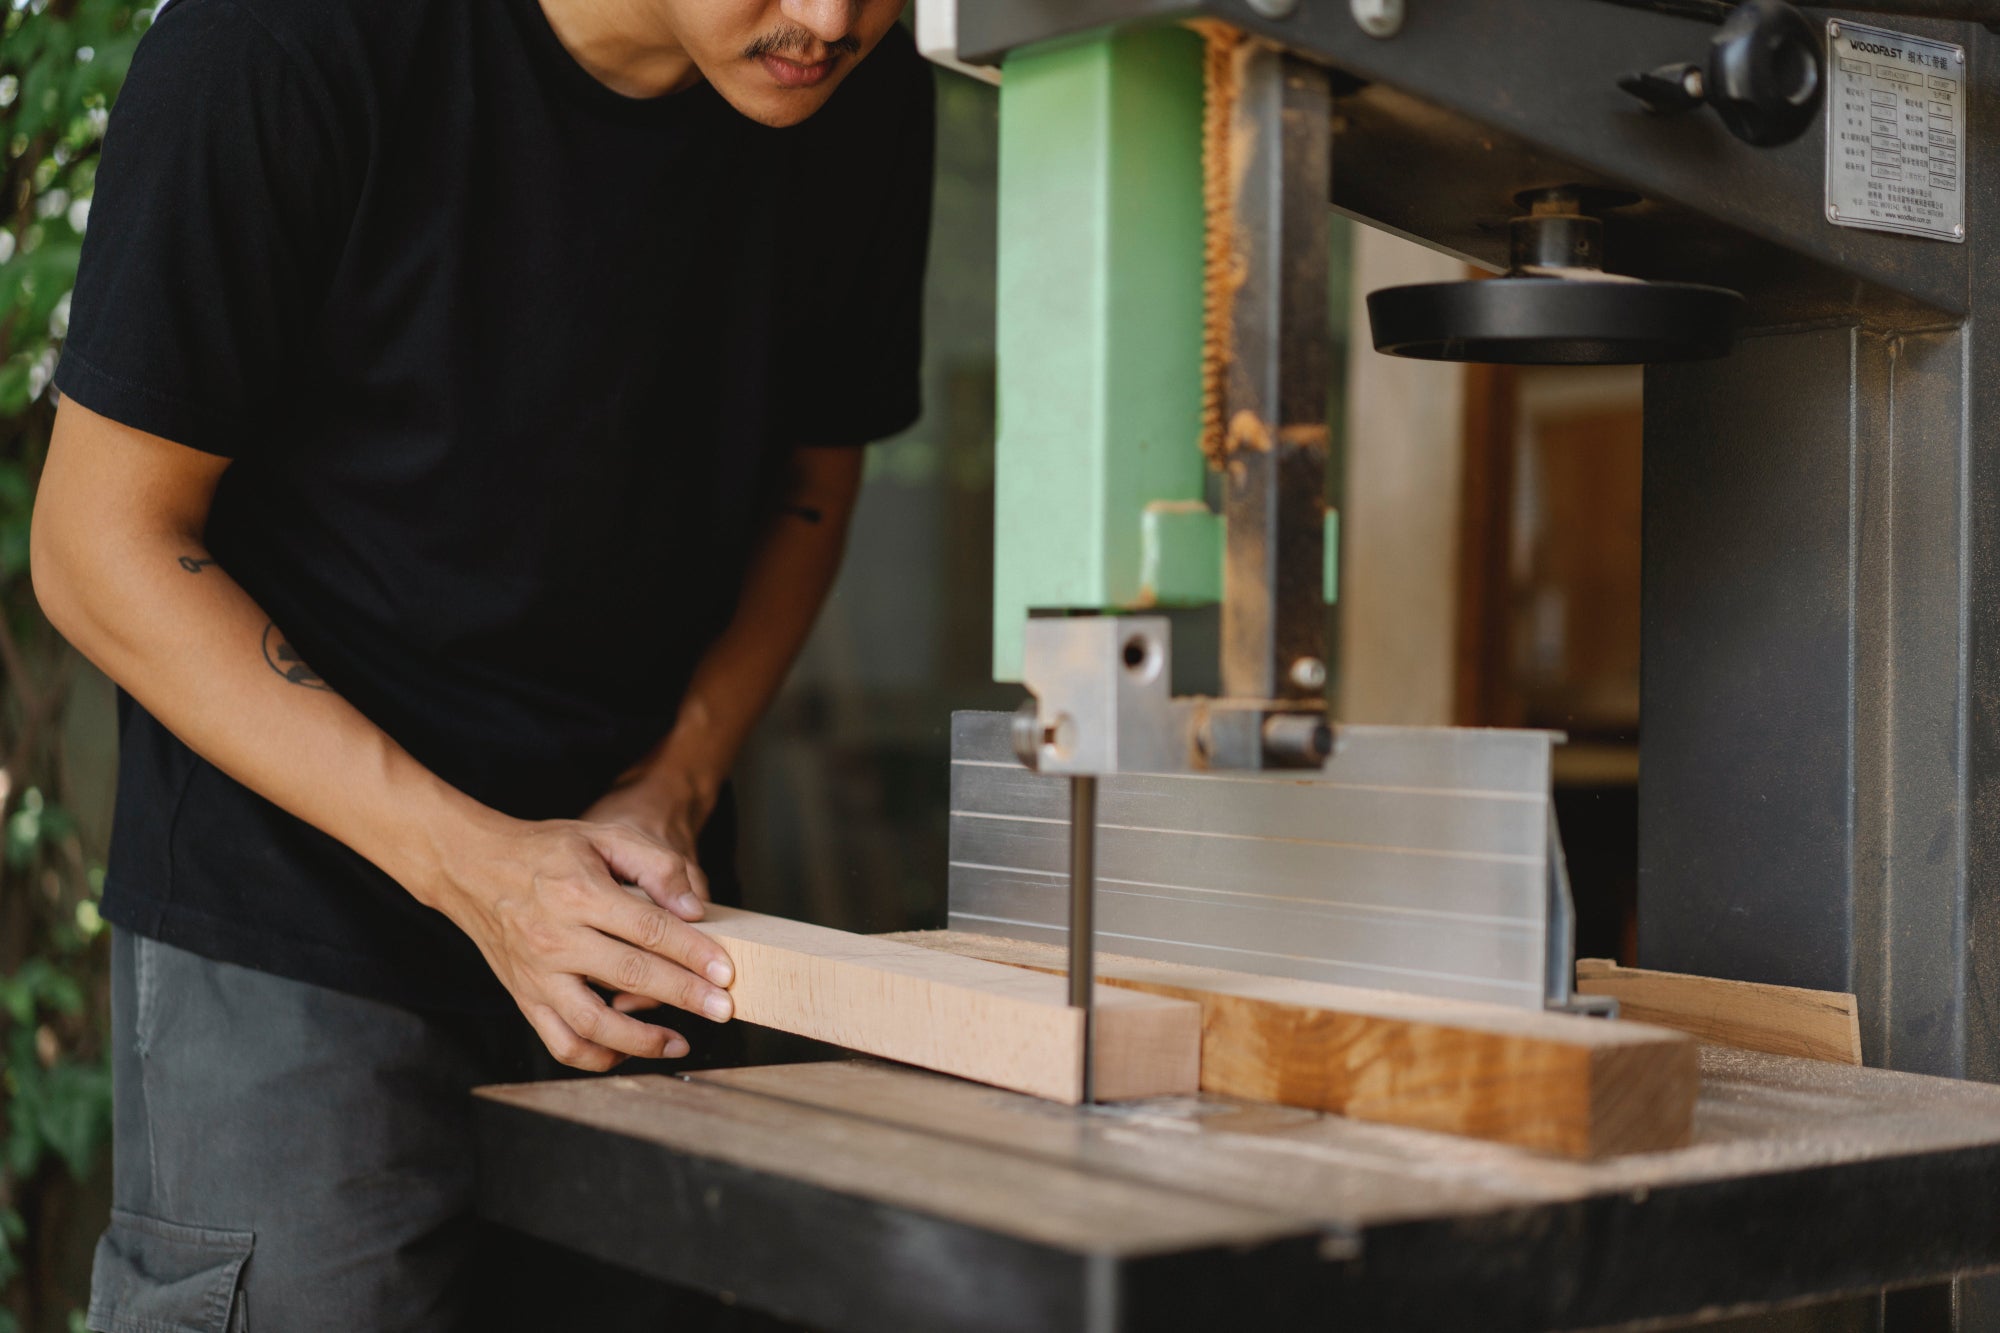 A person wearing a black t-shirt using a band saw to cut a piece of wood in a woodshop.